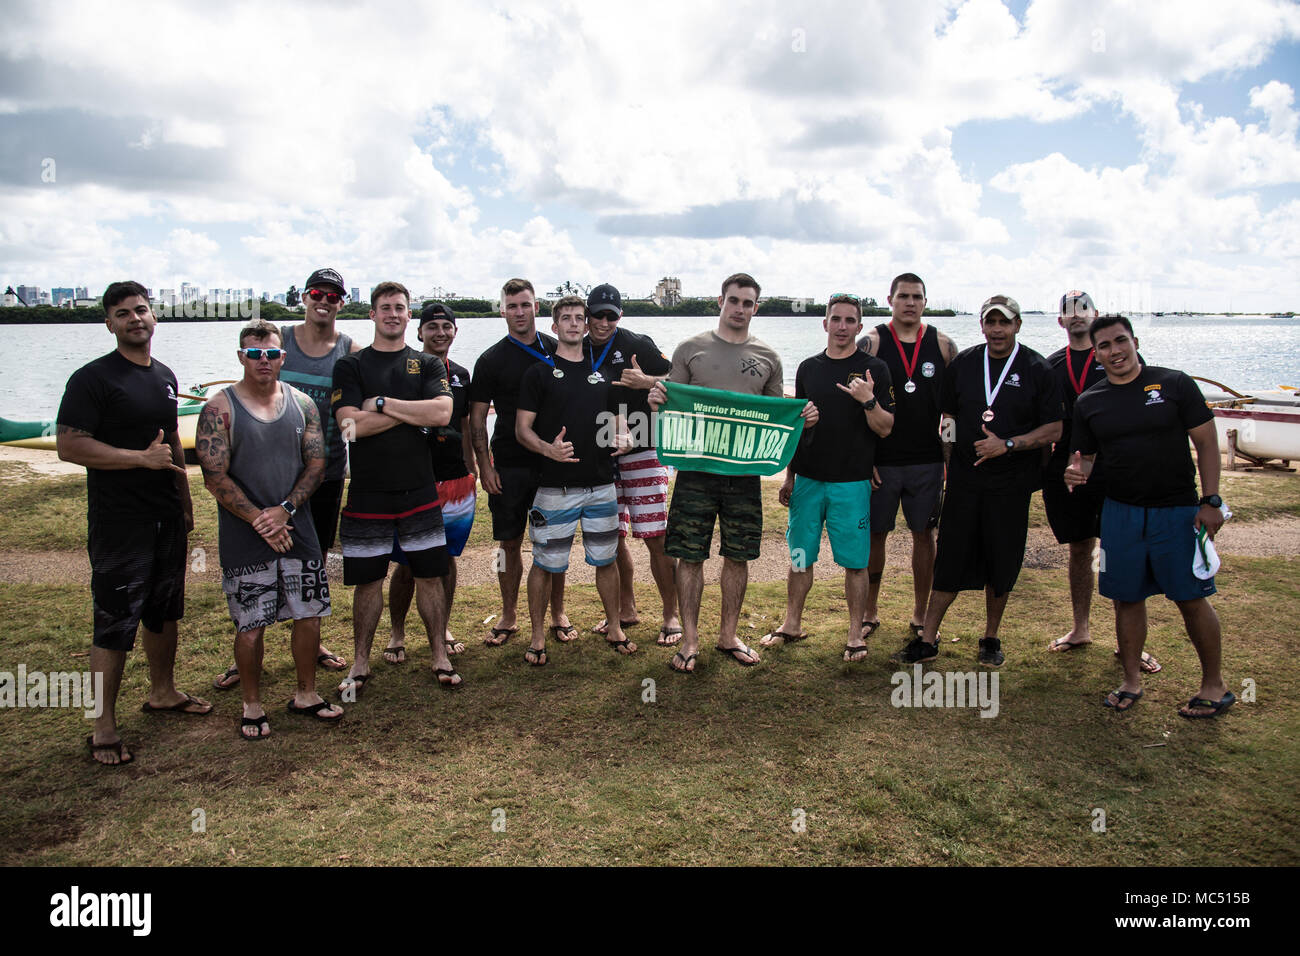 Participants from Borzoi Company, 1st Battalion, 27th Infantry Regiment, 2nd Infantry Brigade Combat Team, 25th Infantry Division pose for a group photo in Keehi Lagoon, Honolulu, Hi., Jan. 30, 2018. In an effort to strengthen international relationships, United States Army Pacific hosted personnel from the British Army to participate in a team building exercise facilitating outrigger canoeing. (U.S. Army photo by 1st. Lt. Ryan DeBooy) Stock Photo